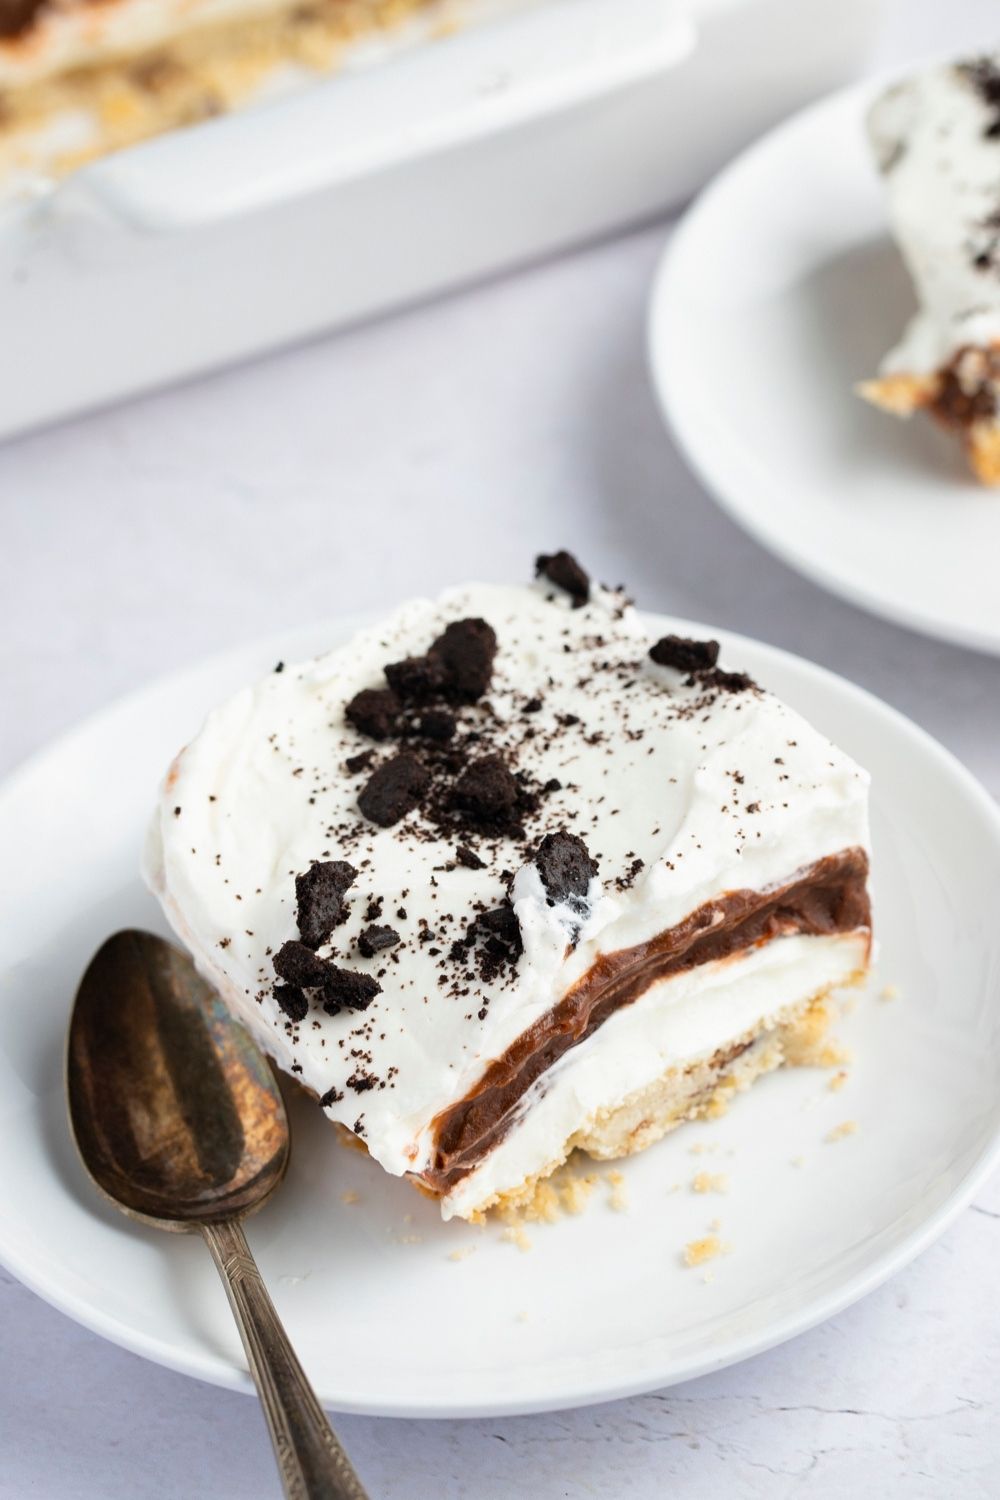 Best Ever Sex in a Pan (Easy Dessert Recipe) featuring Sweet and Delightful Sex in a Pan with Creamy Layers of Chocolate, Vanilla, Cream, and Oreo Cookies